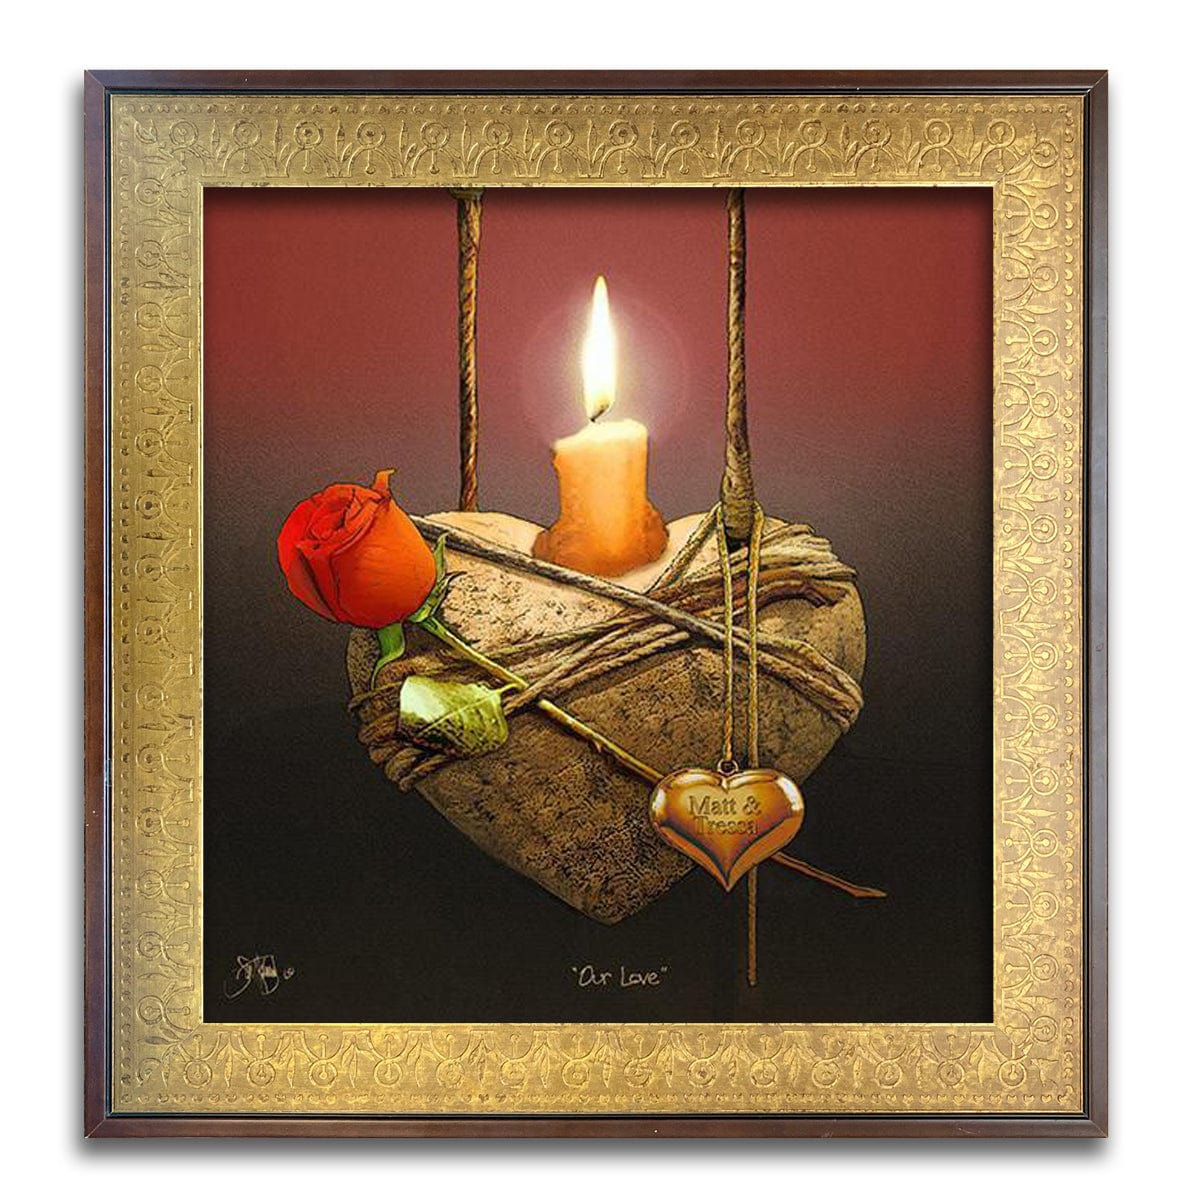 Special edition framing - Personalized canvas art - Our Love